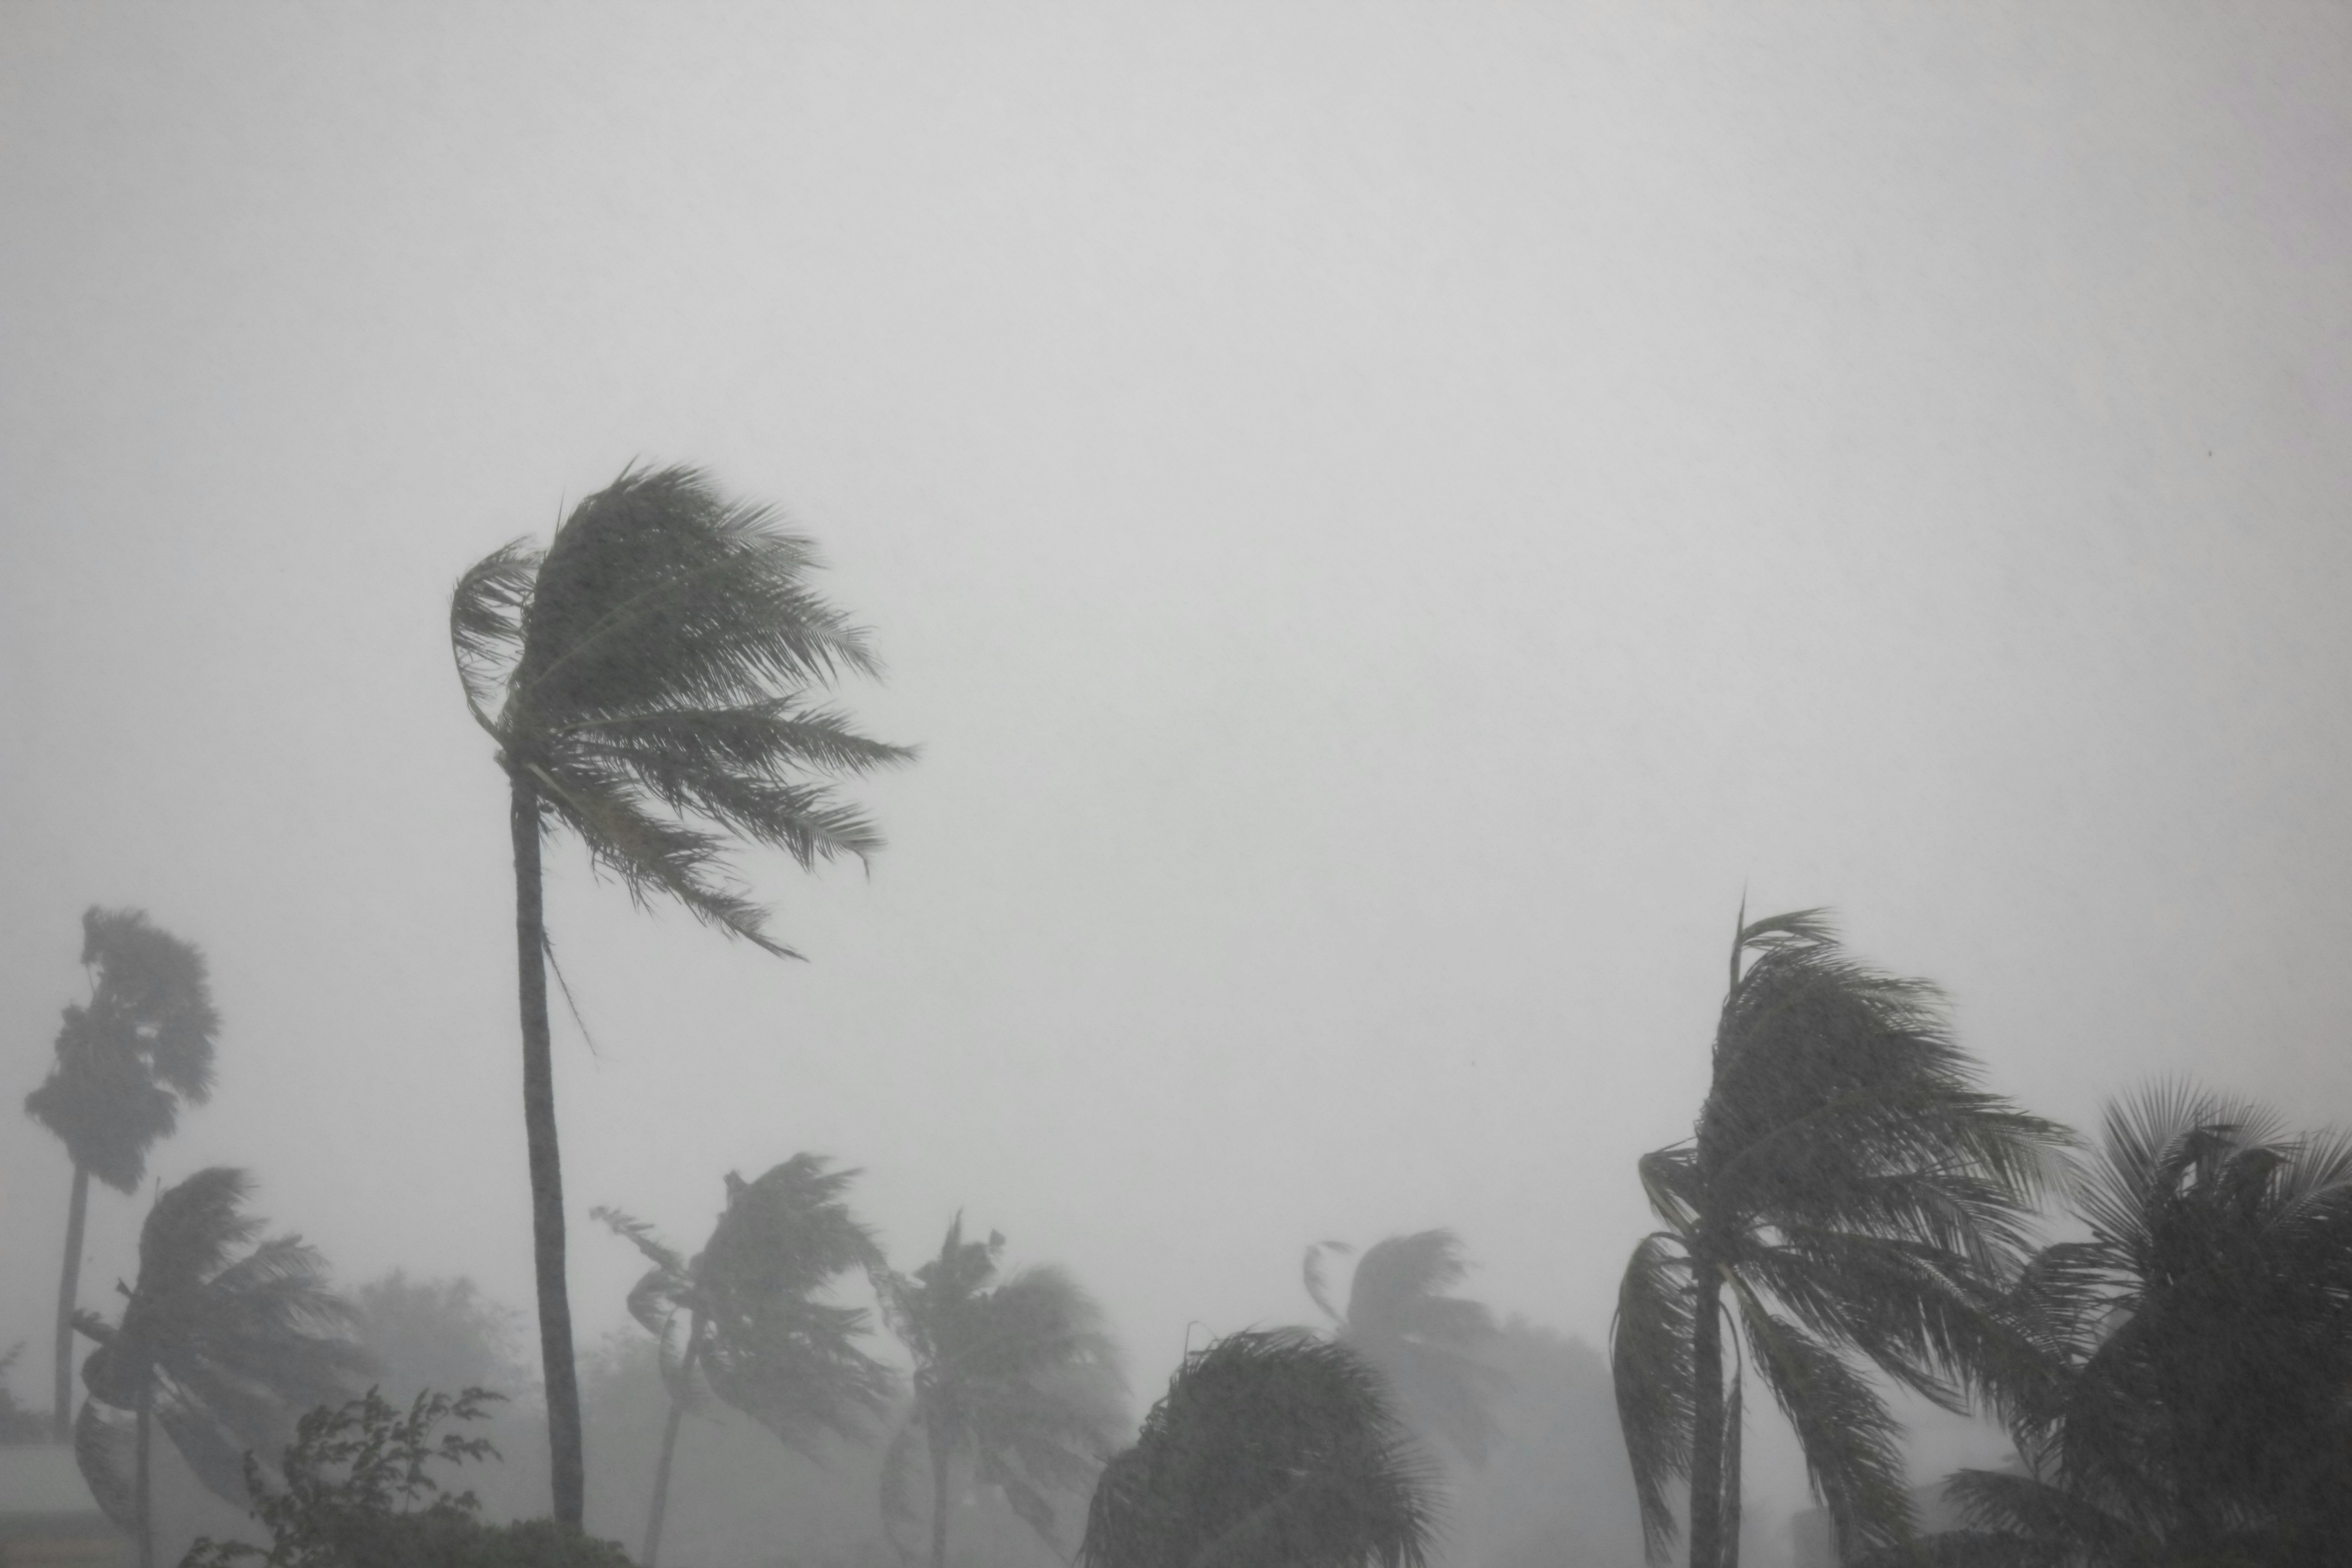 Palm trees bent in the strong winds and storm of an incoming tornado